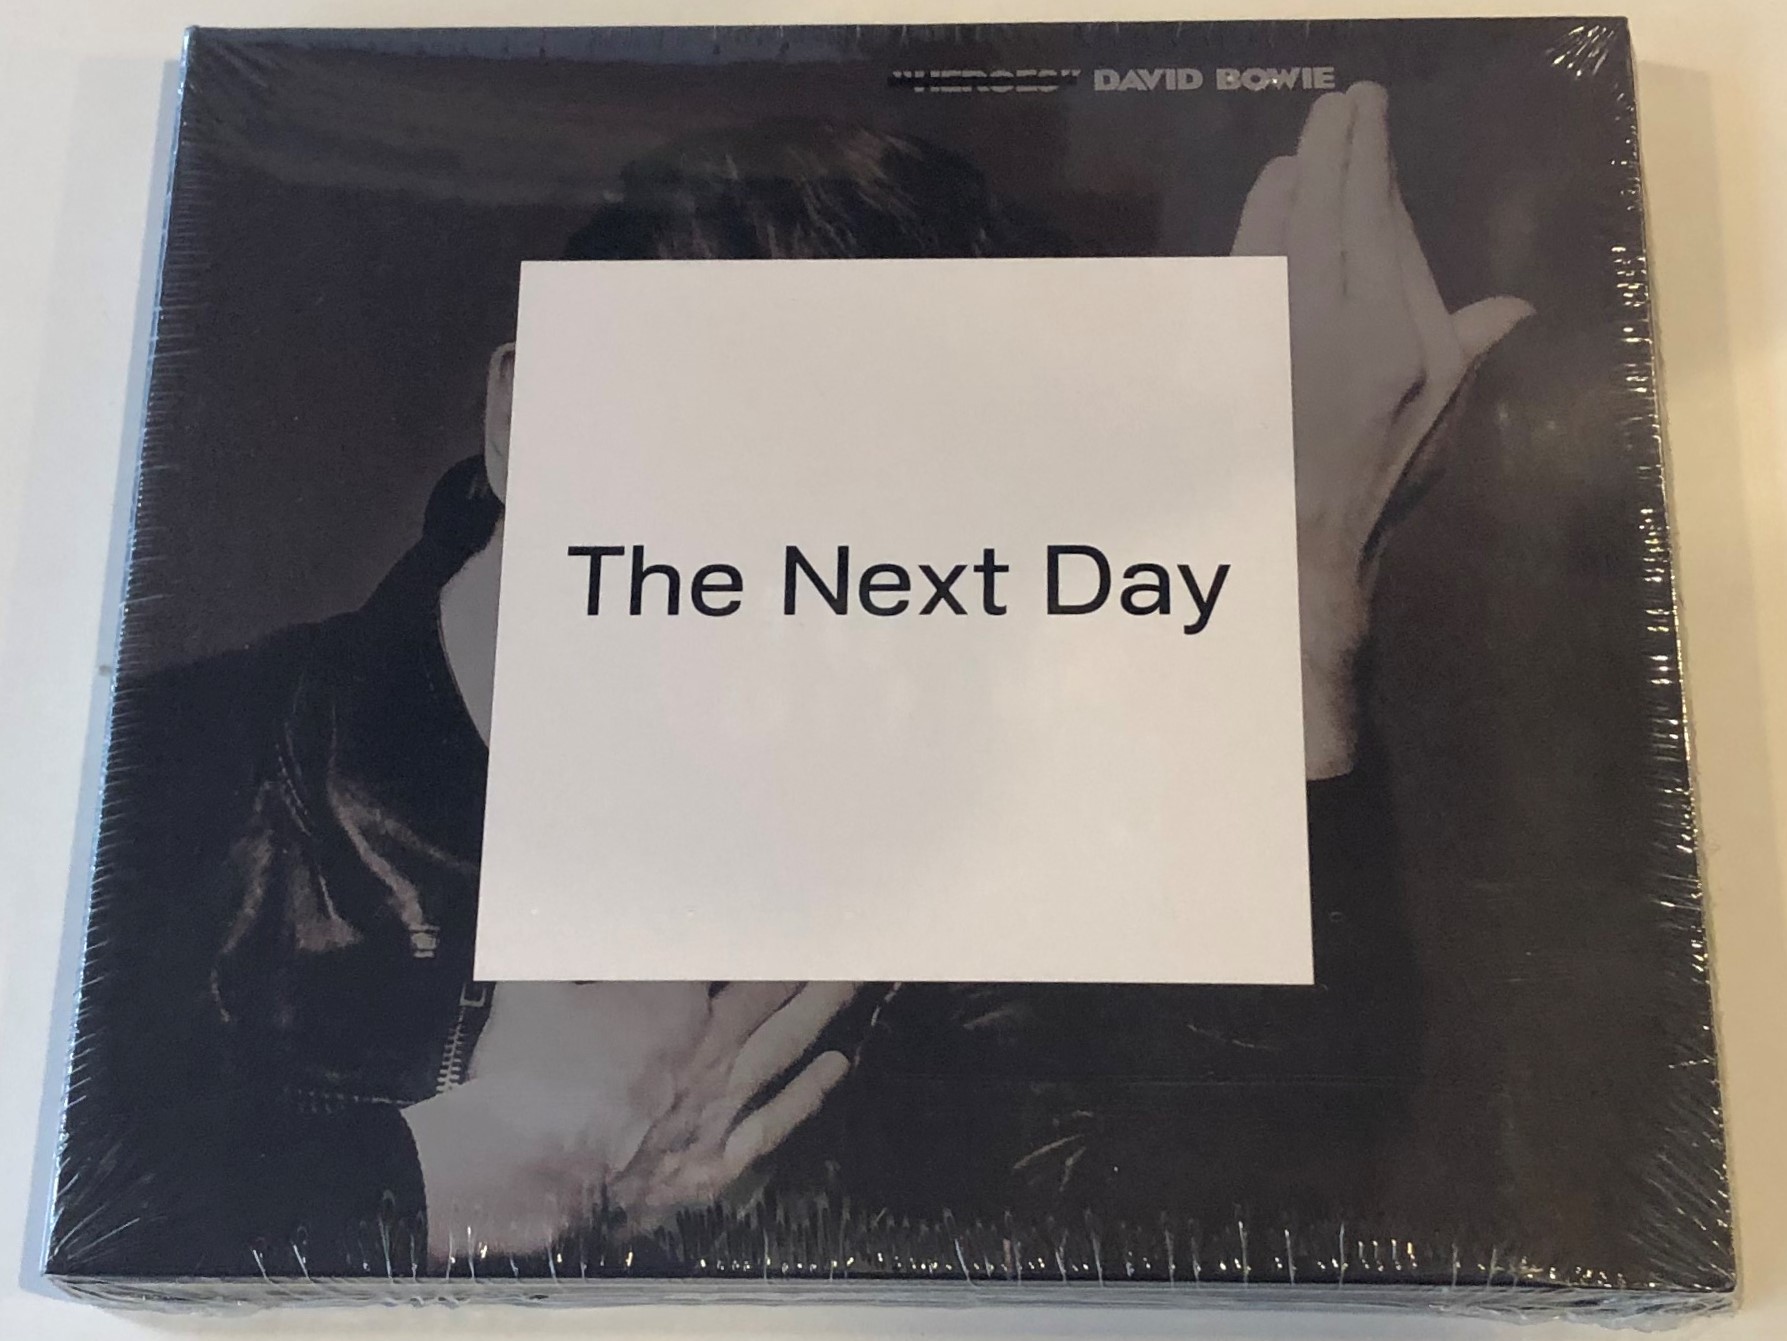 david-bowie-the-next-day-iso-records-audio-cd-2013-88765-46192-2-1-.jpg